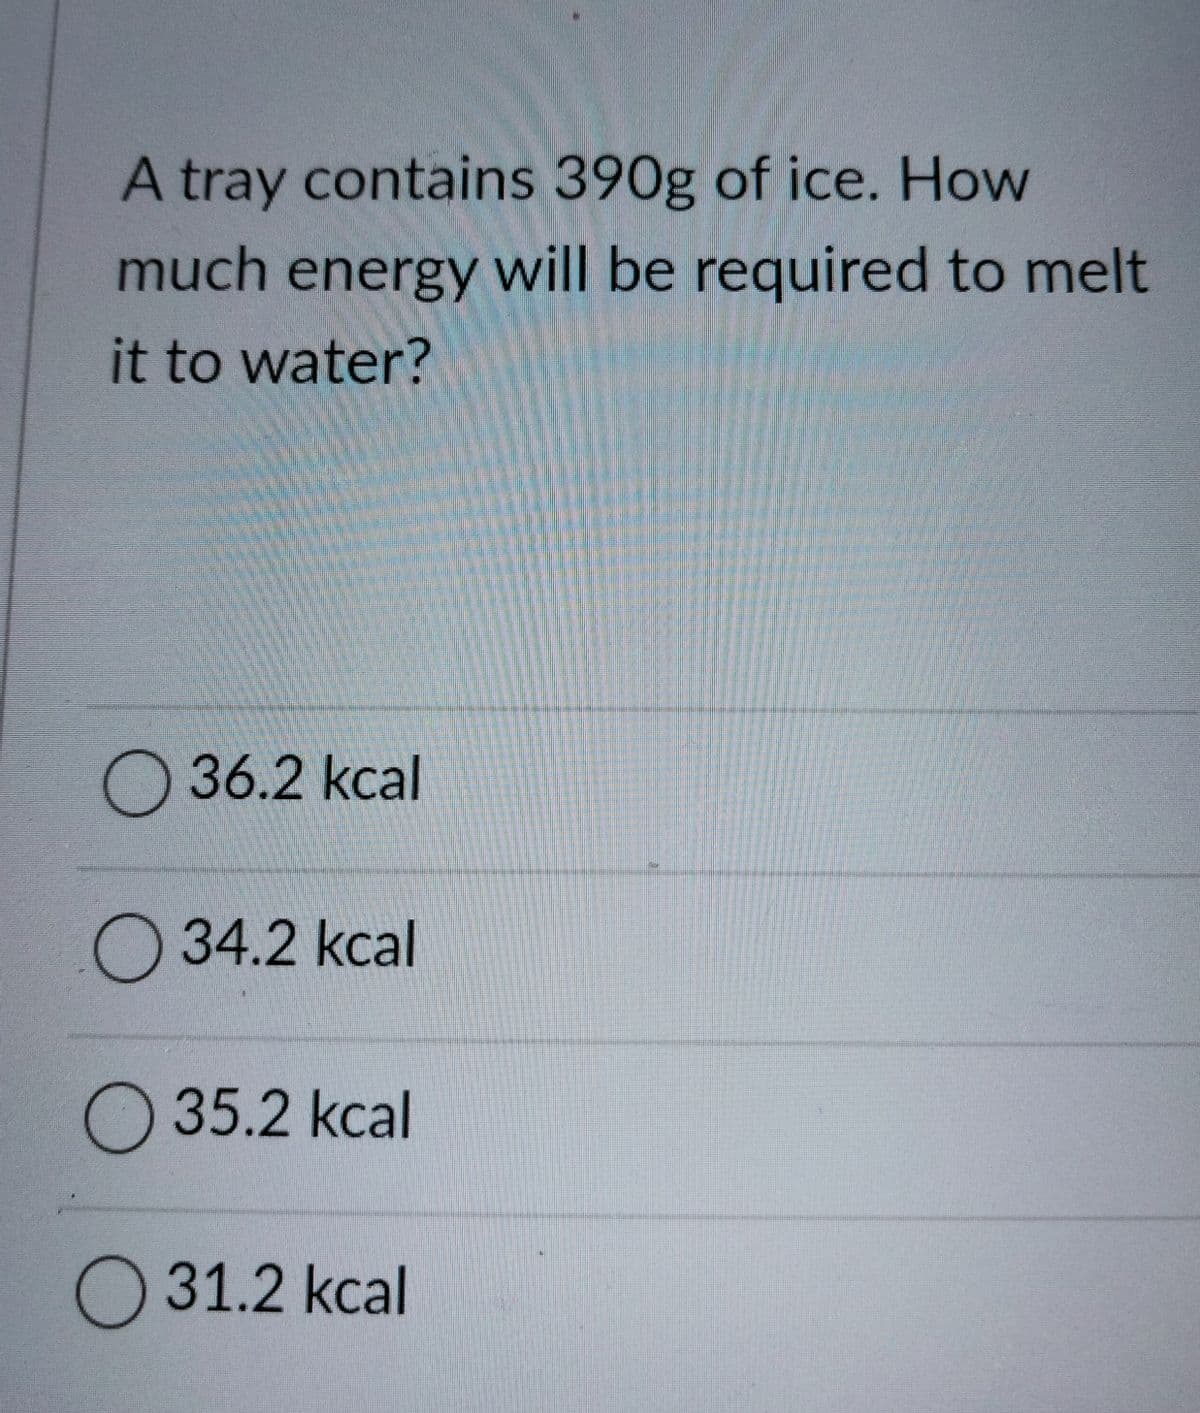 A tray contains 390g of ice. How
much energy will be required to melt
it to water?
O 36.2 kcal
34.2 kcal
O 35.2 kcal
O 31.2 kcal
